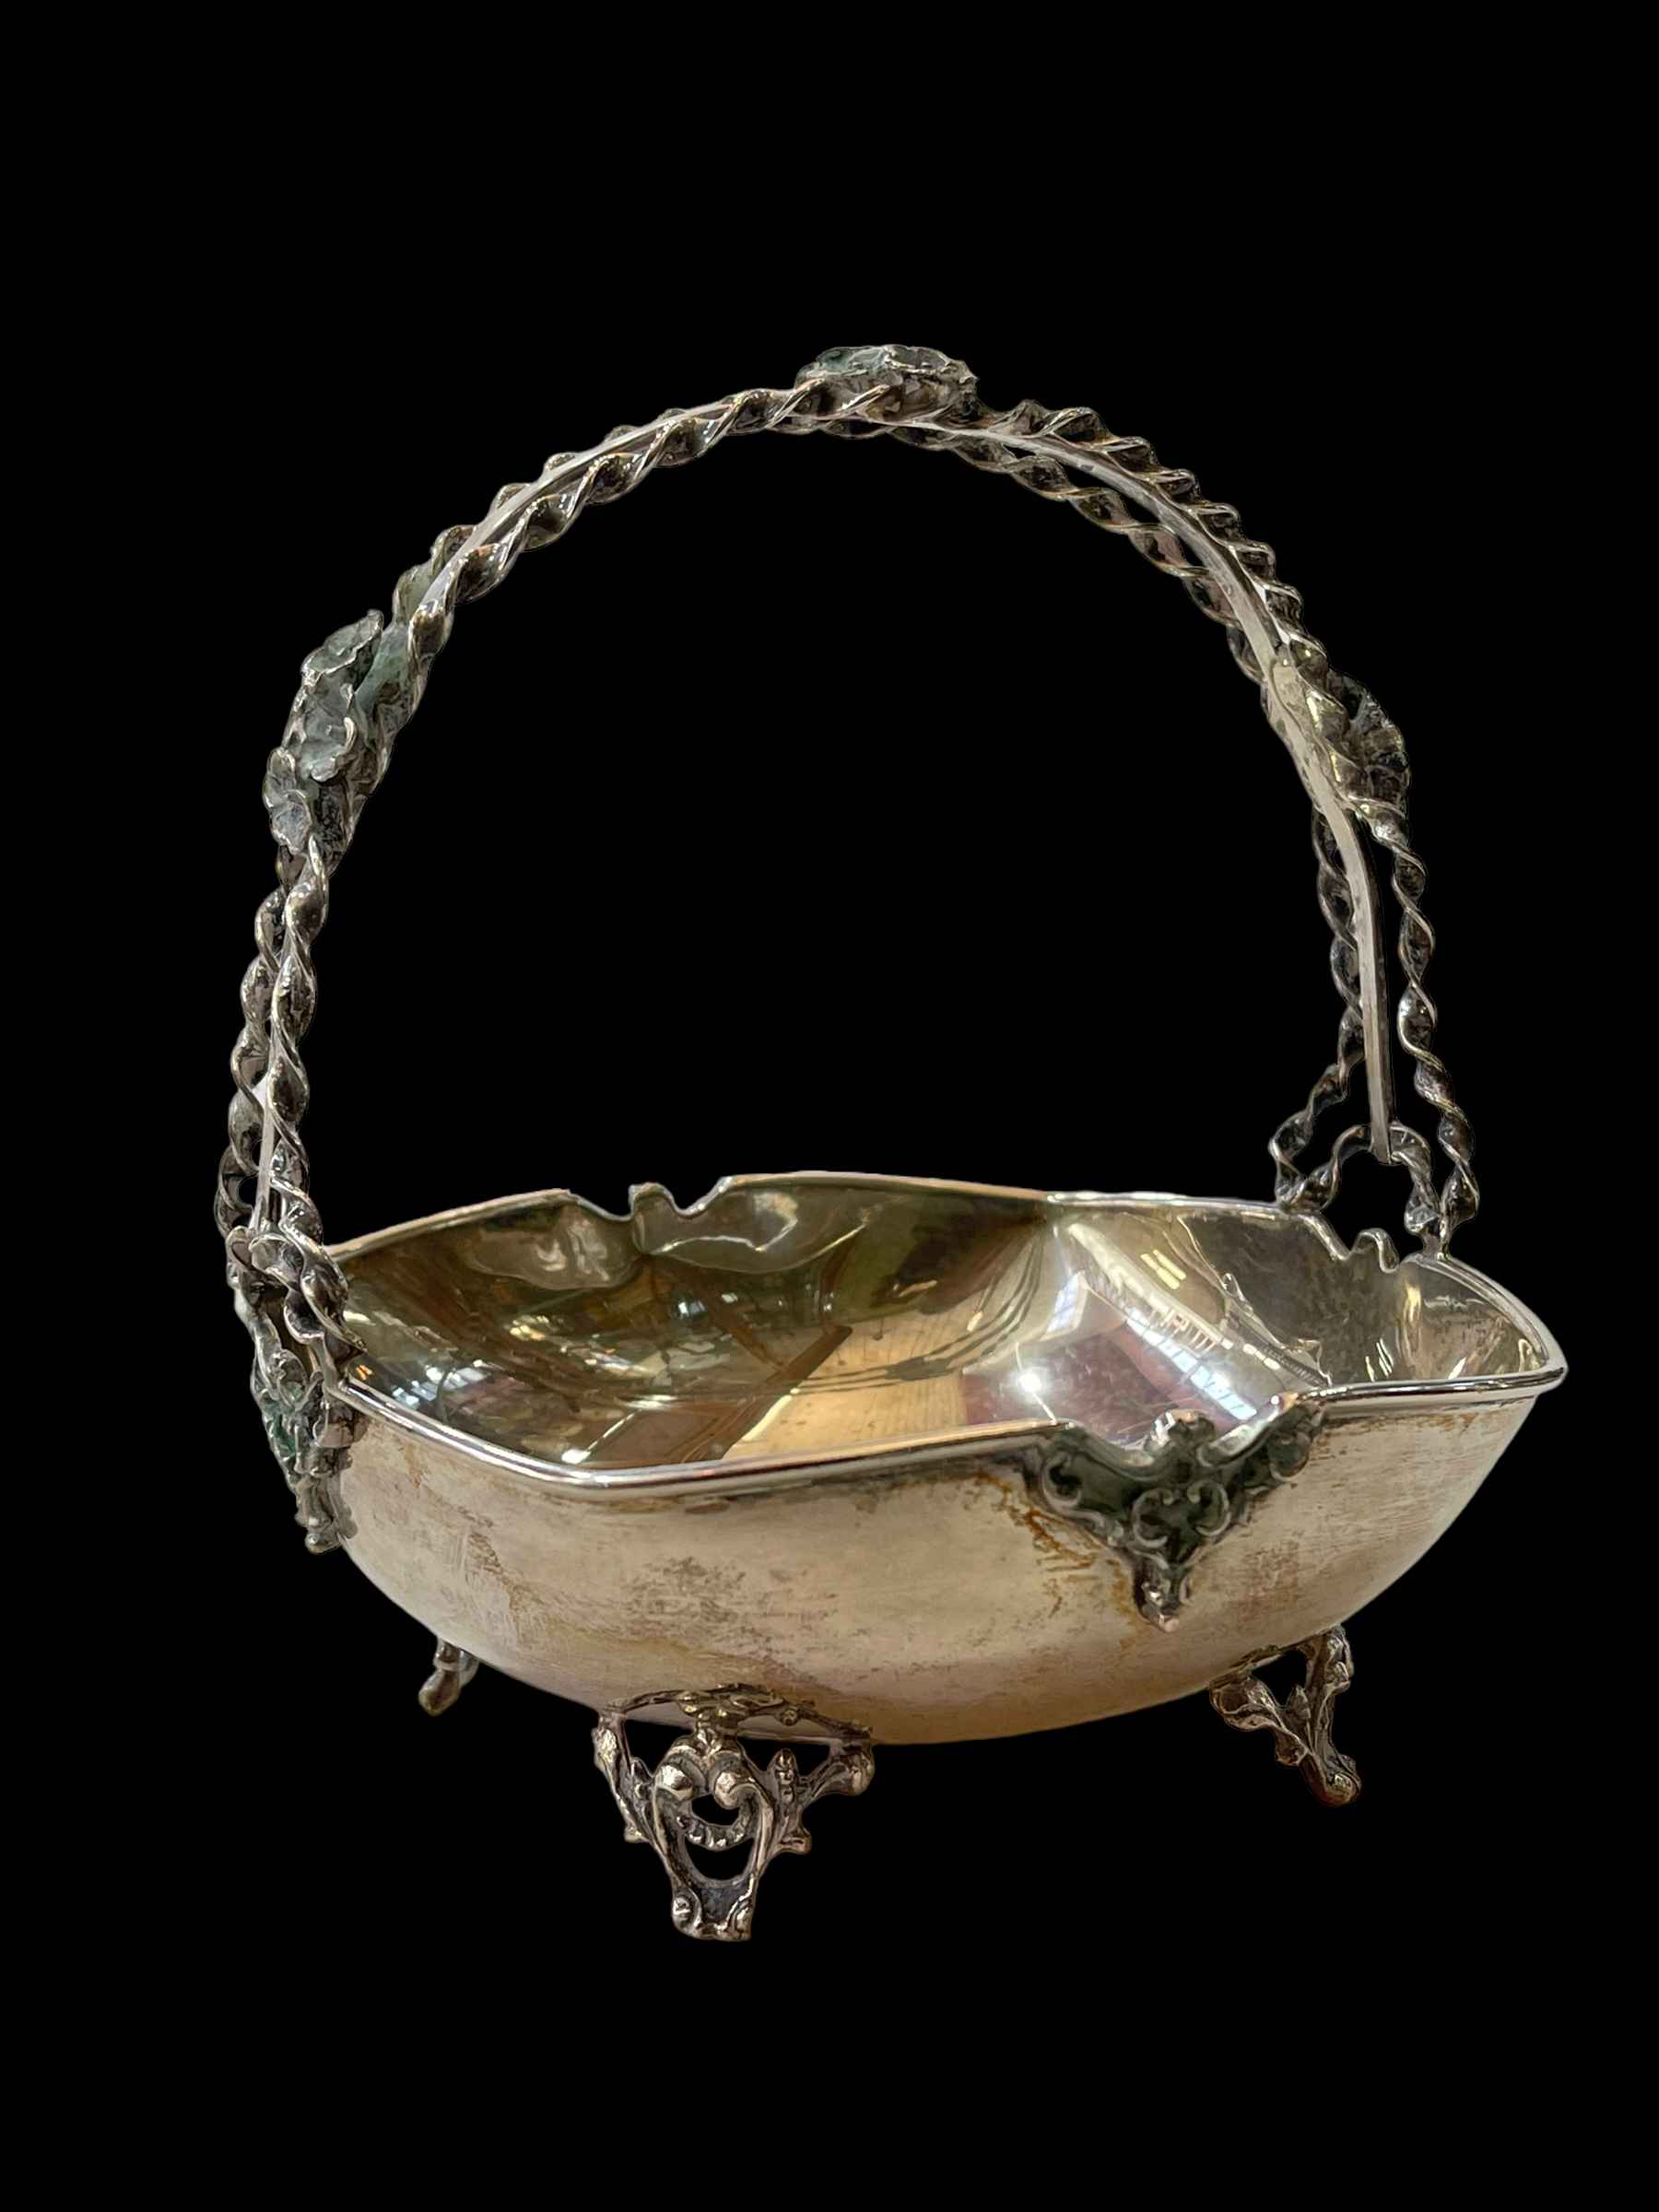 Sterling silver bon bon basket with ornate handle and feet, 13.5cm across.